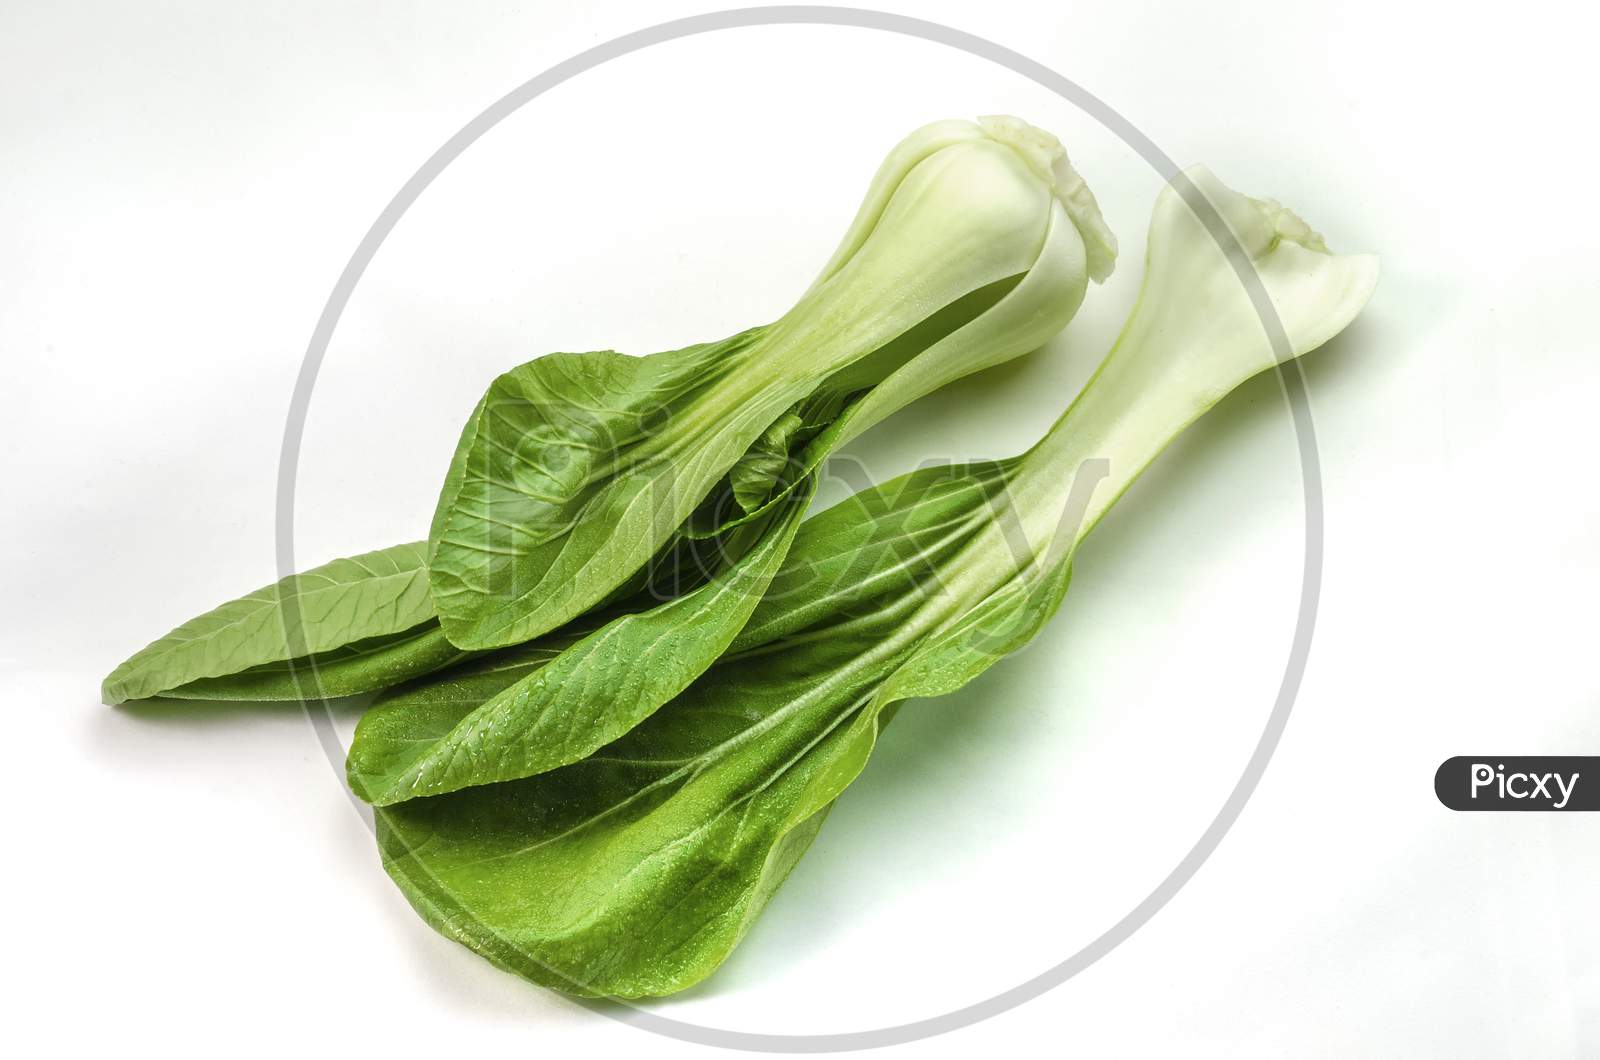 Two Pak choi or Chinese cabbage side by side on a white background.